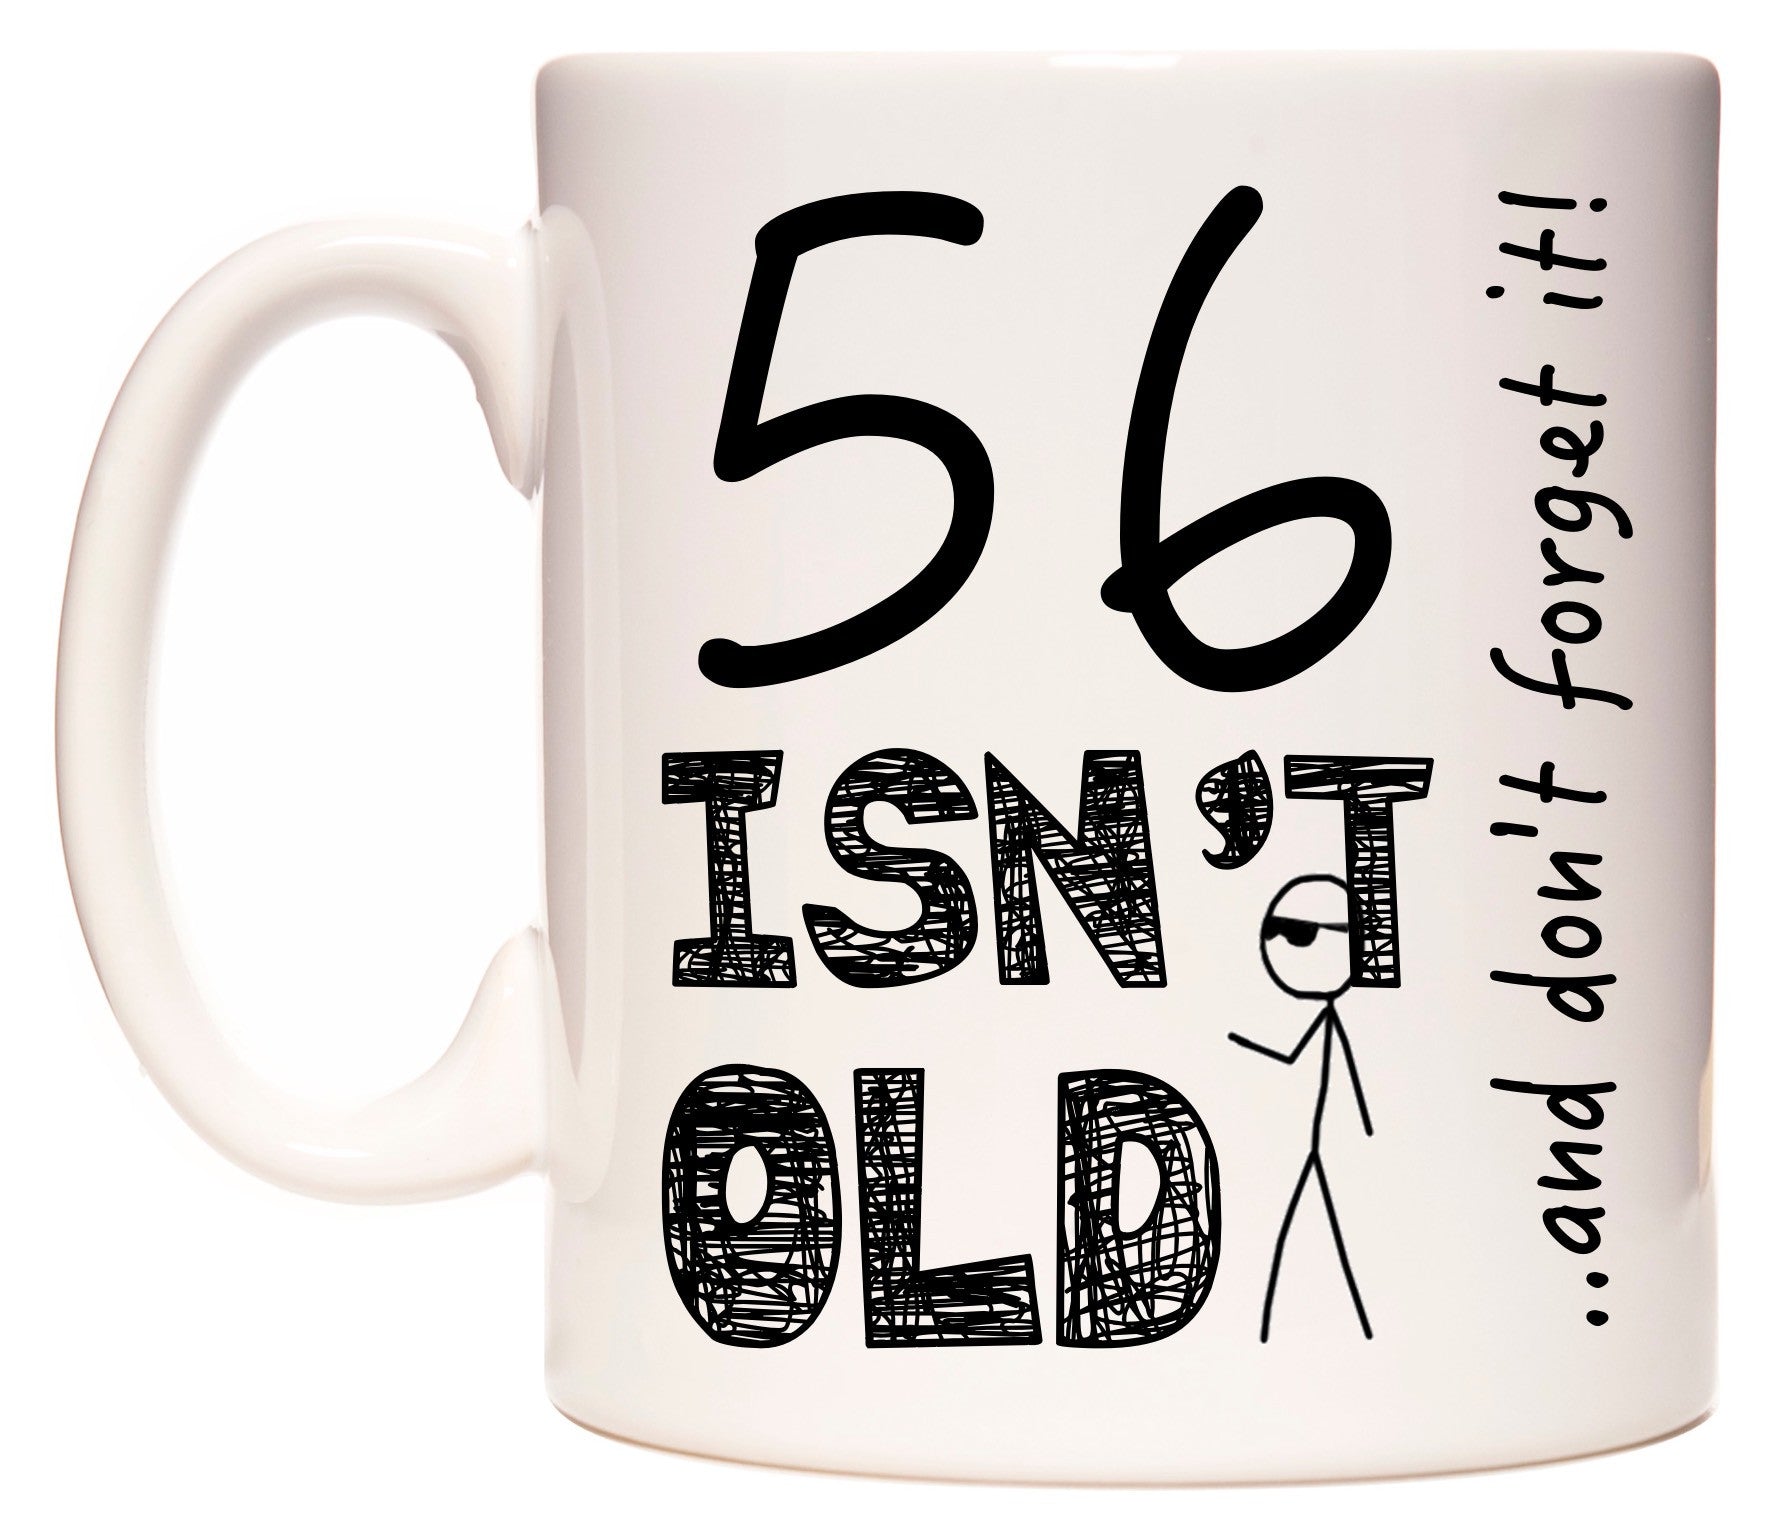 This mug features 56 Isn't Old